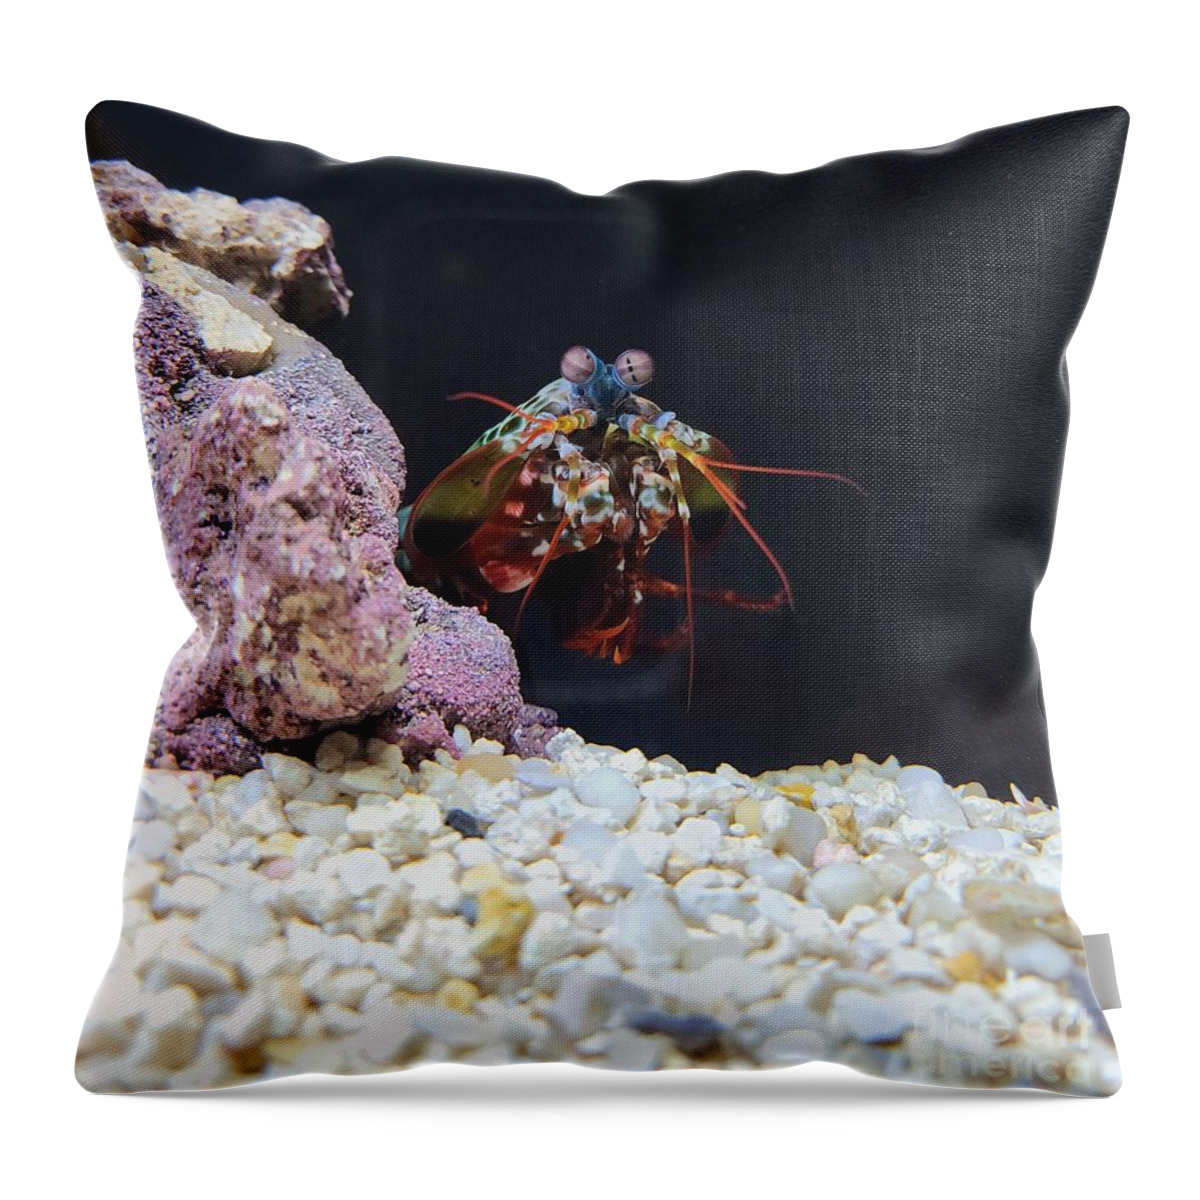 Crab Throw Pillow featuring the pyrography Cross-eyed crab by Elena Pratt